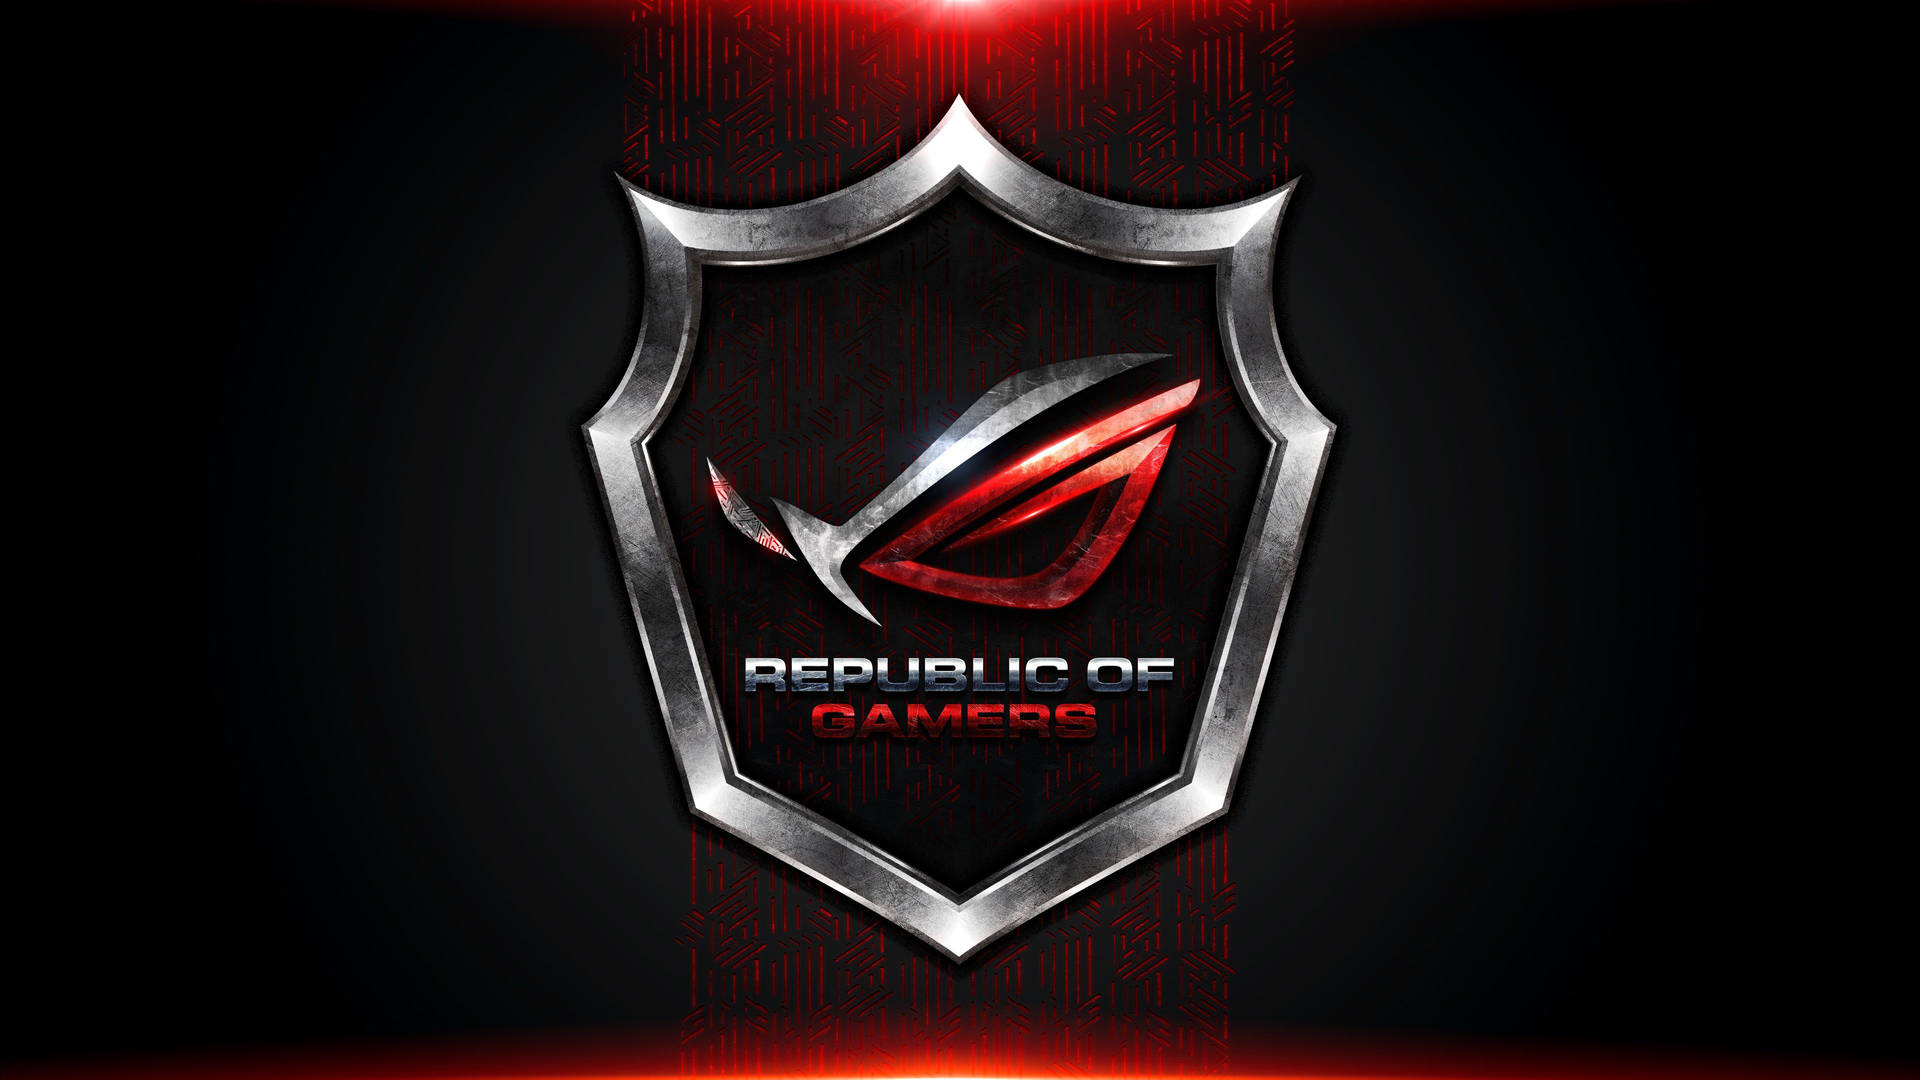 Asus Rog 3840X2160 Wallpaper and Background Image